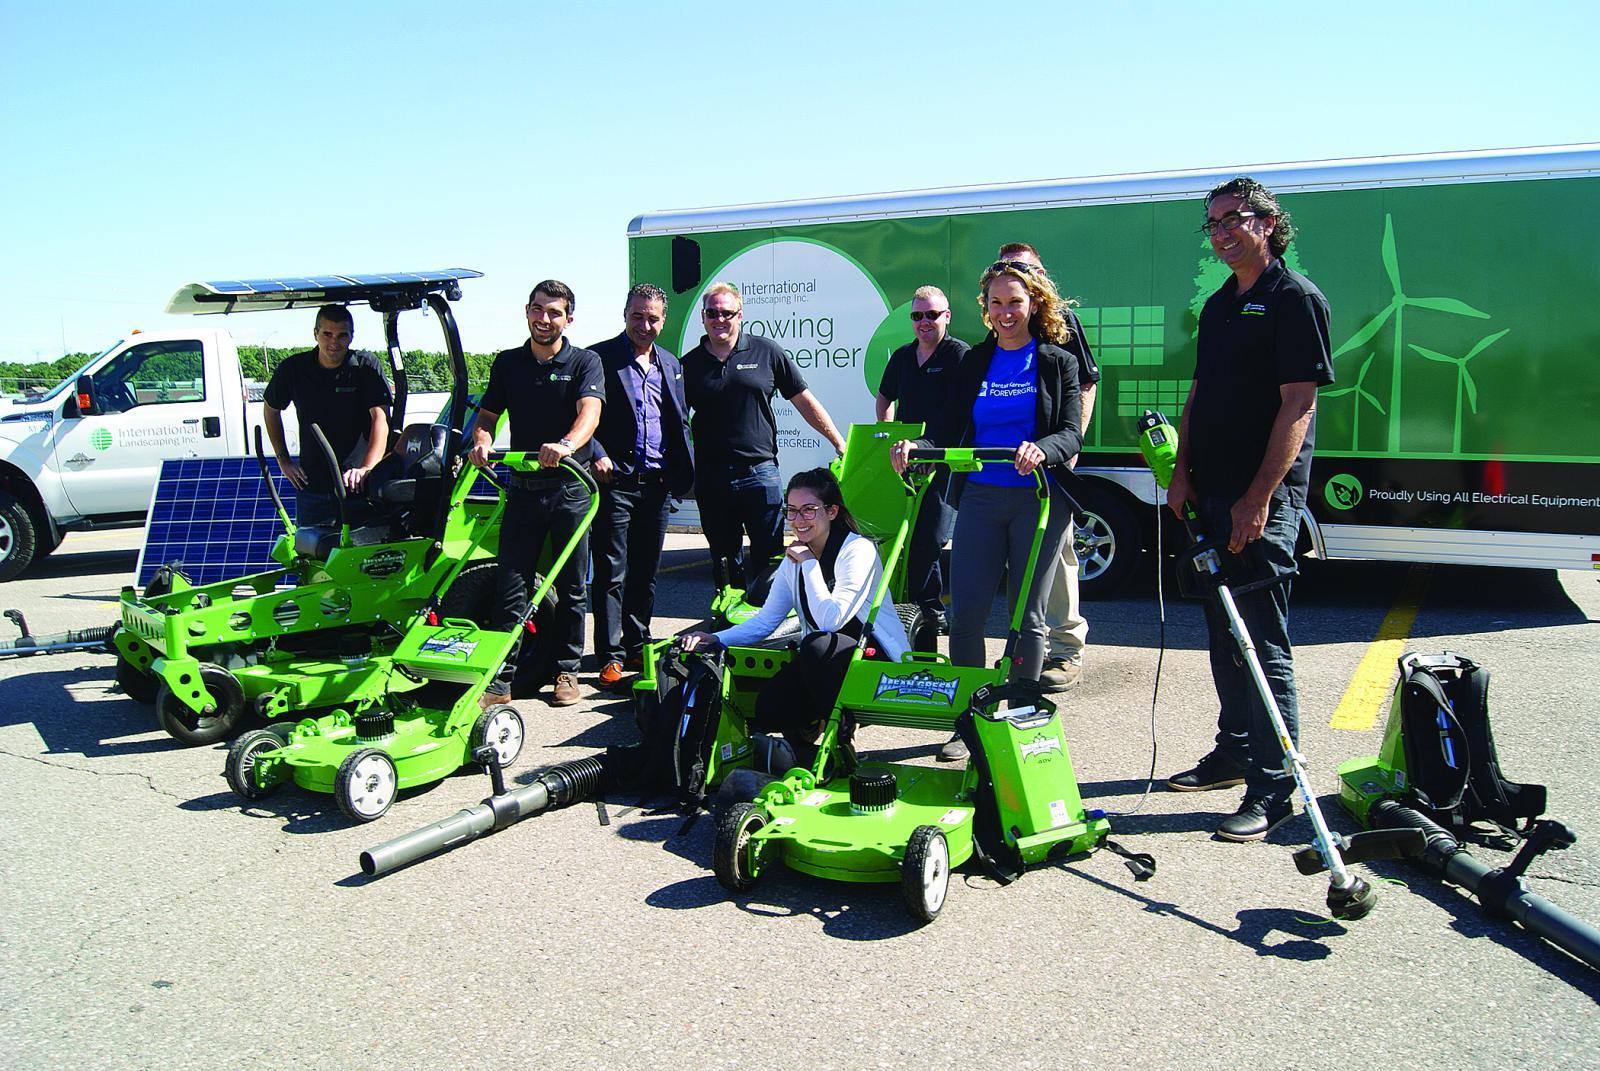 The team from International Landscaping proudly displaying solar and electric grounds maintenance equipment.